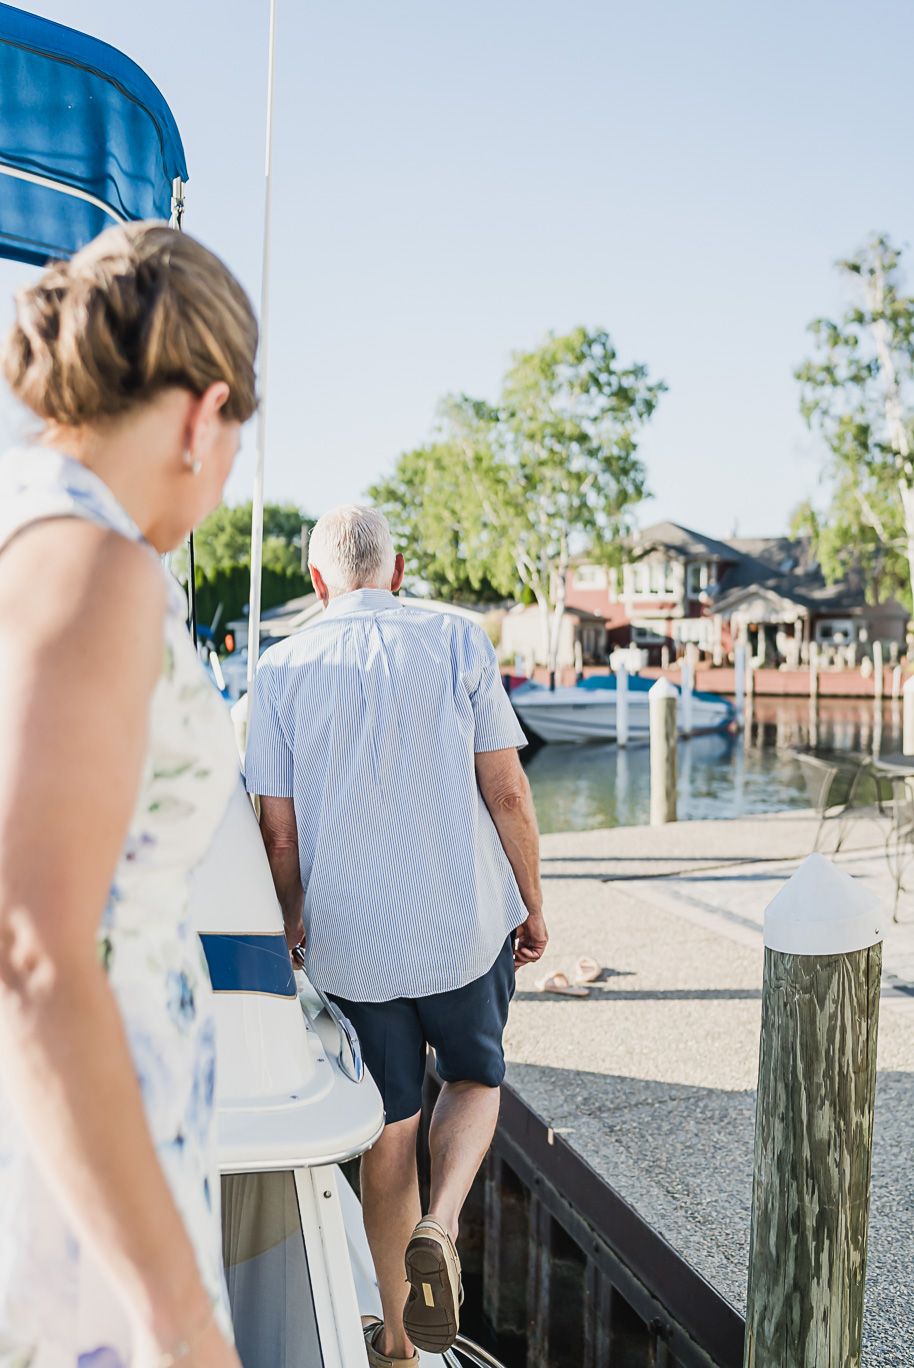 New Baltimore engagement session on a boat at the marina under the michigan summer setting sun provided by Kari Dawson, top-rated Metro Detroit wedding photographer.